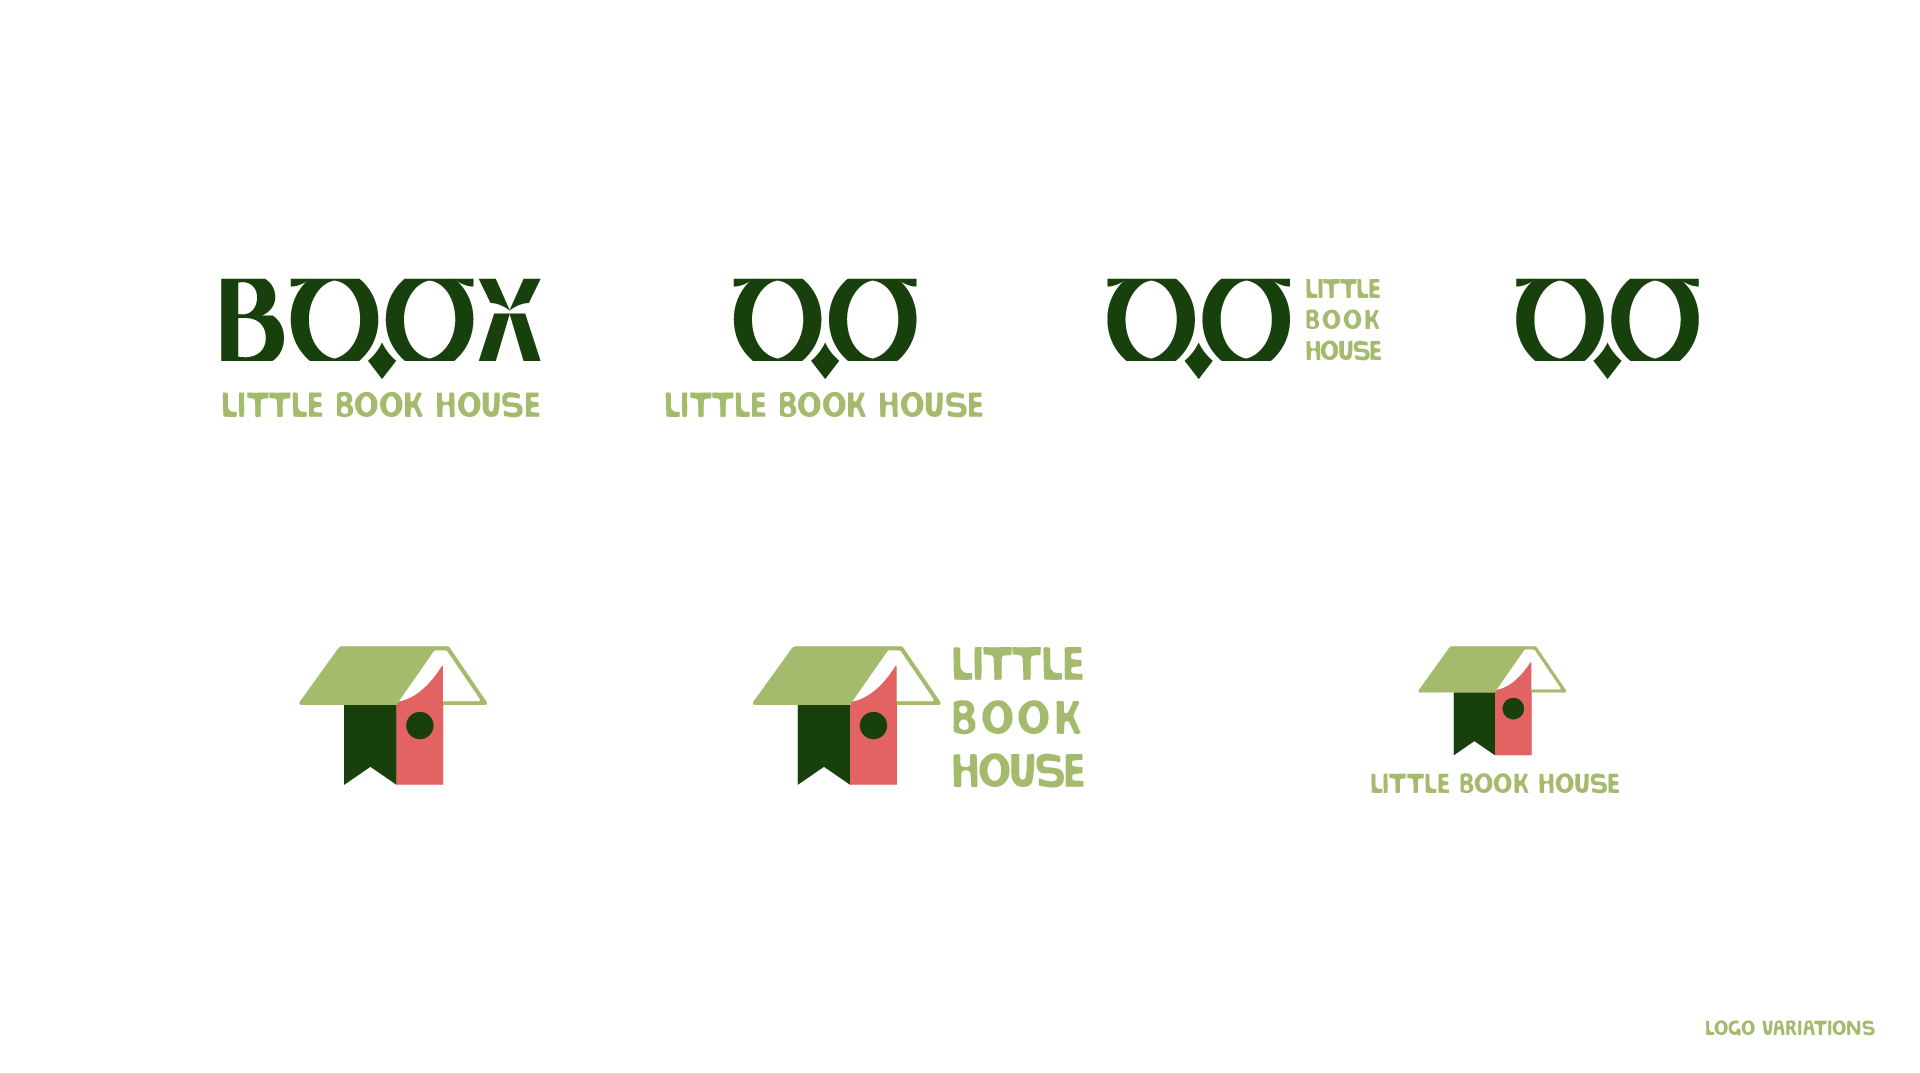 Logo variations with and without the birdhouse mark.